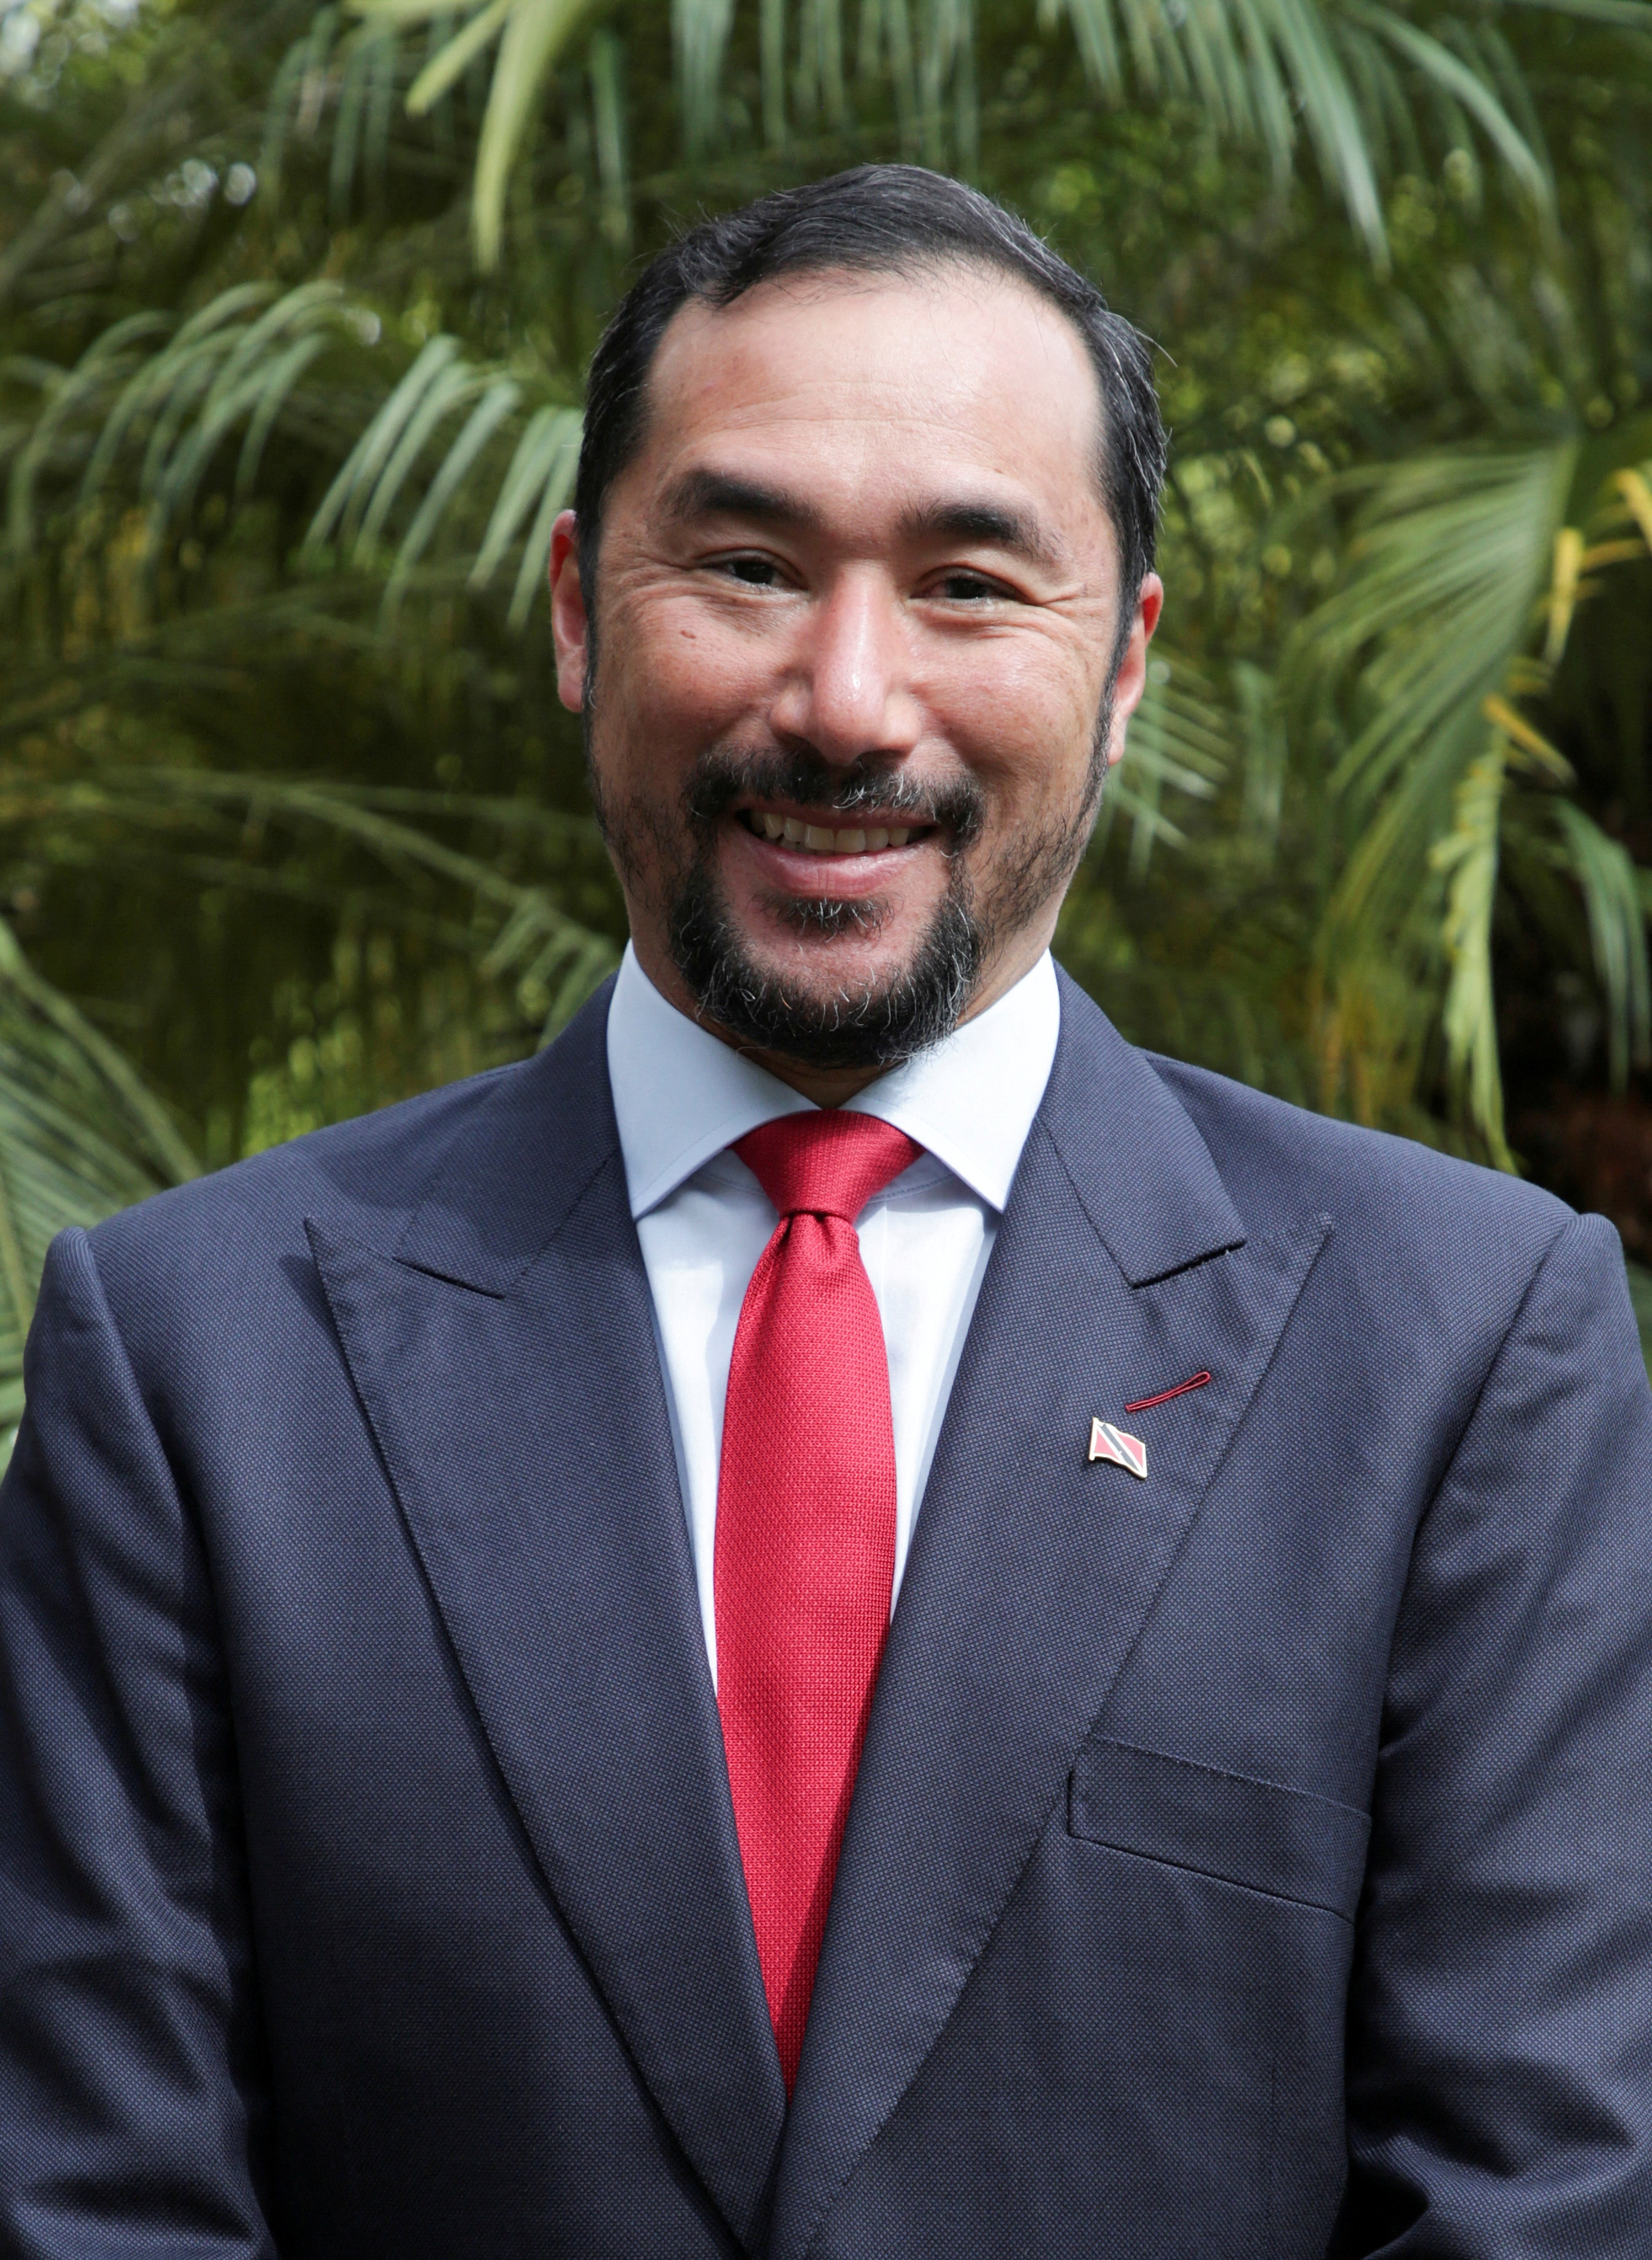 Trinidad and Tobago's Energy Minister Stuart Young poses for a photograph, in Paramaribo